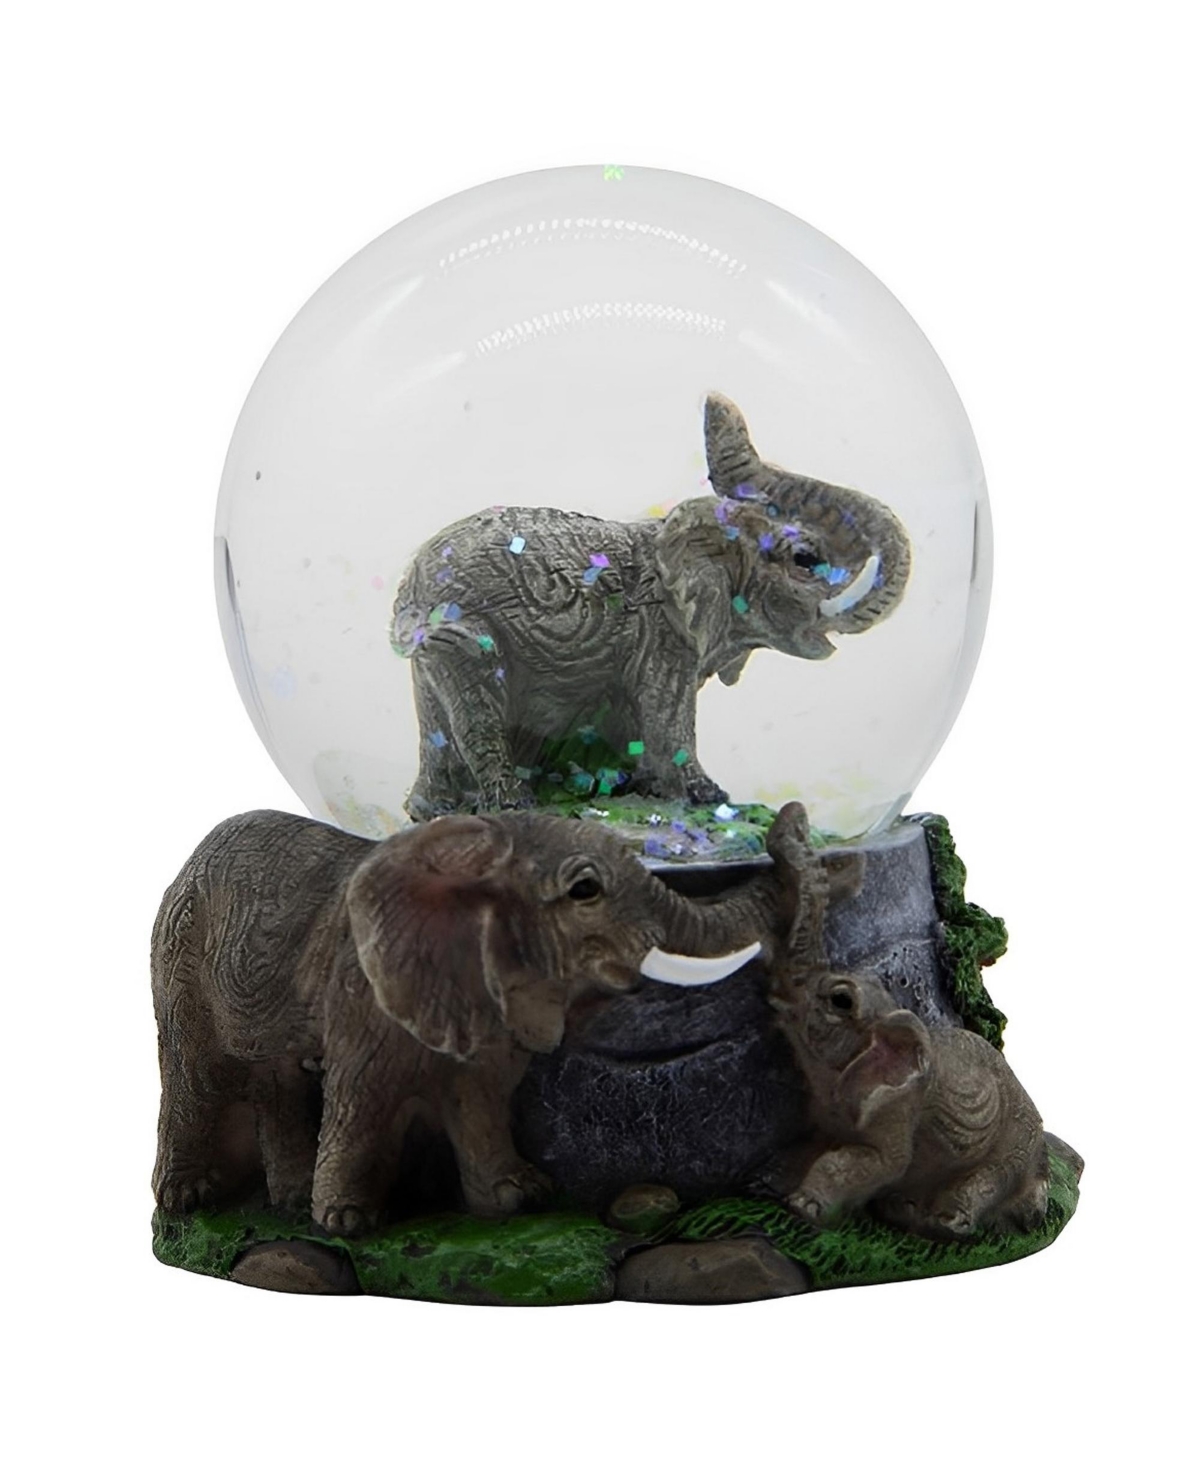 3.5"H Elephant Glitter Snow Globe Figurine Home Decor Perfect Gift for House Warming, Holidays and Birthdays - Multicolor